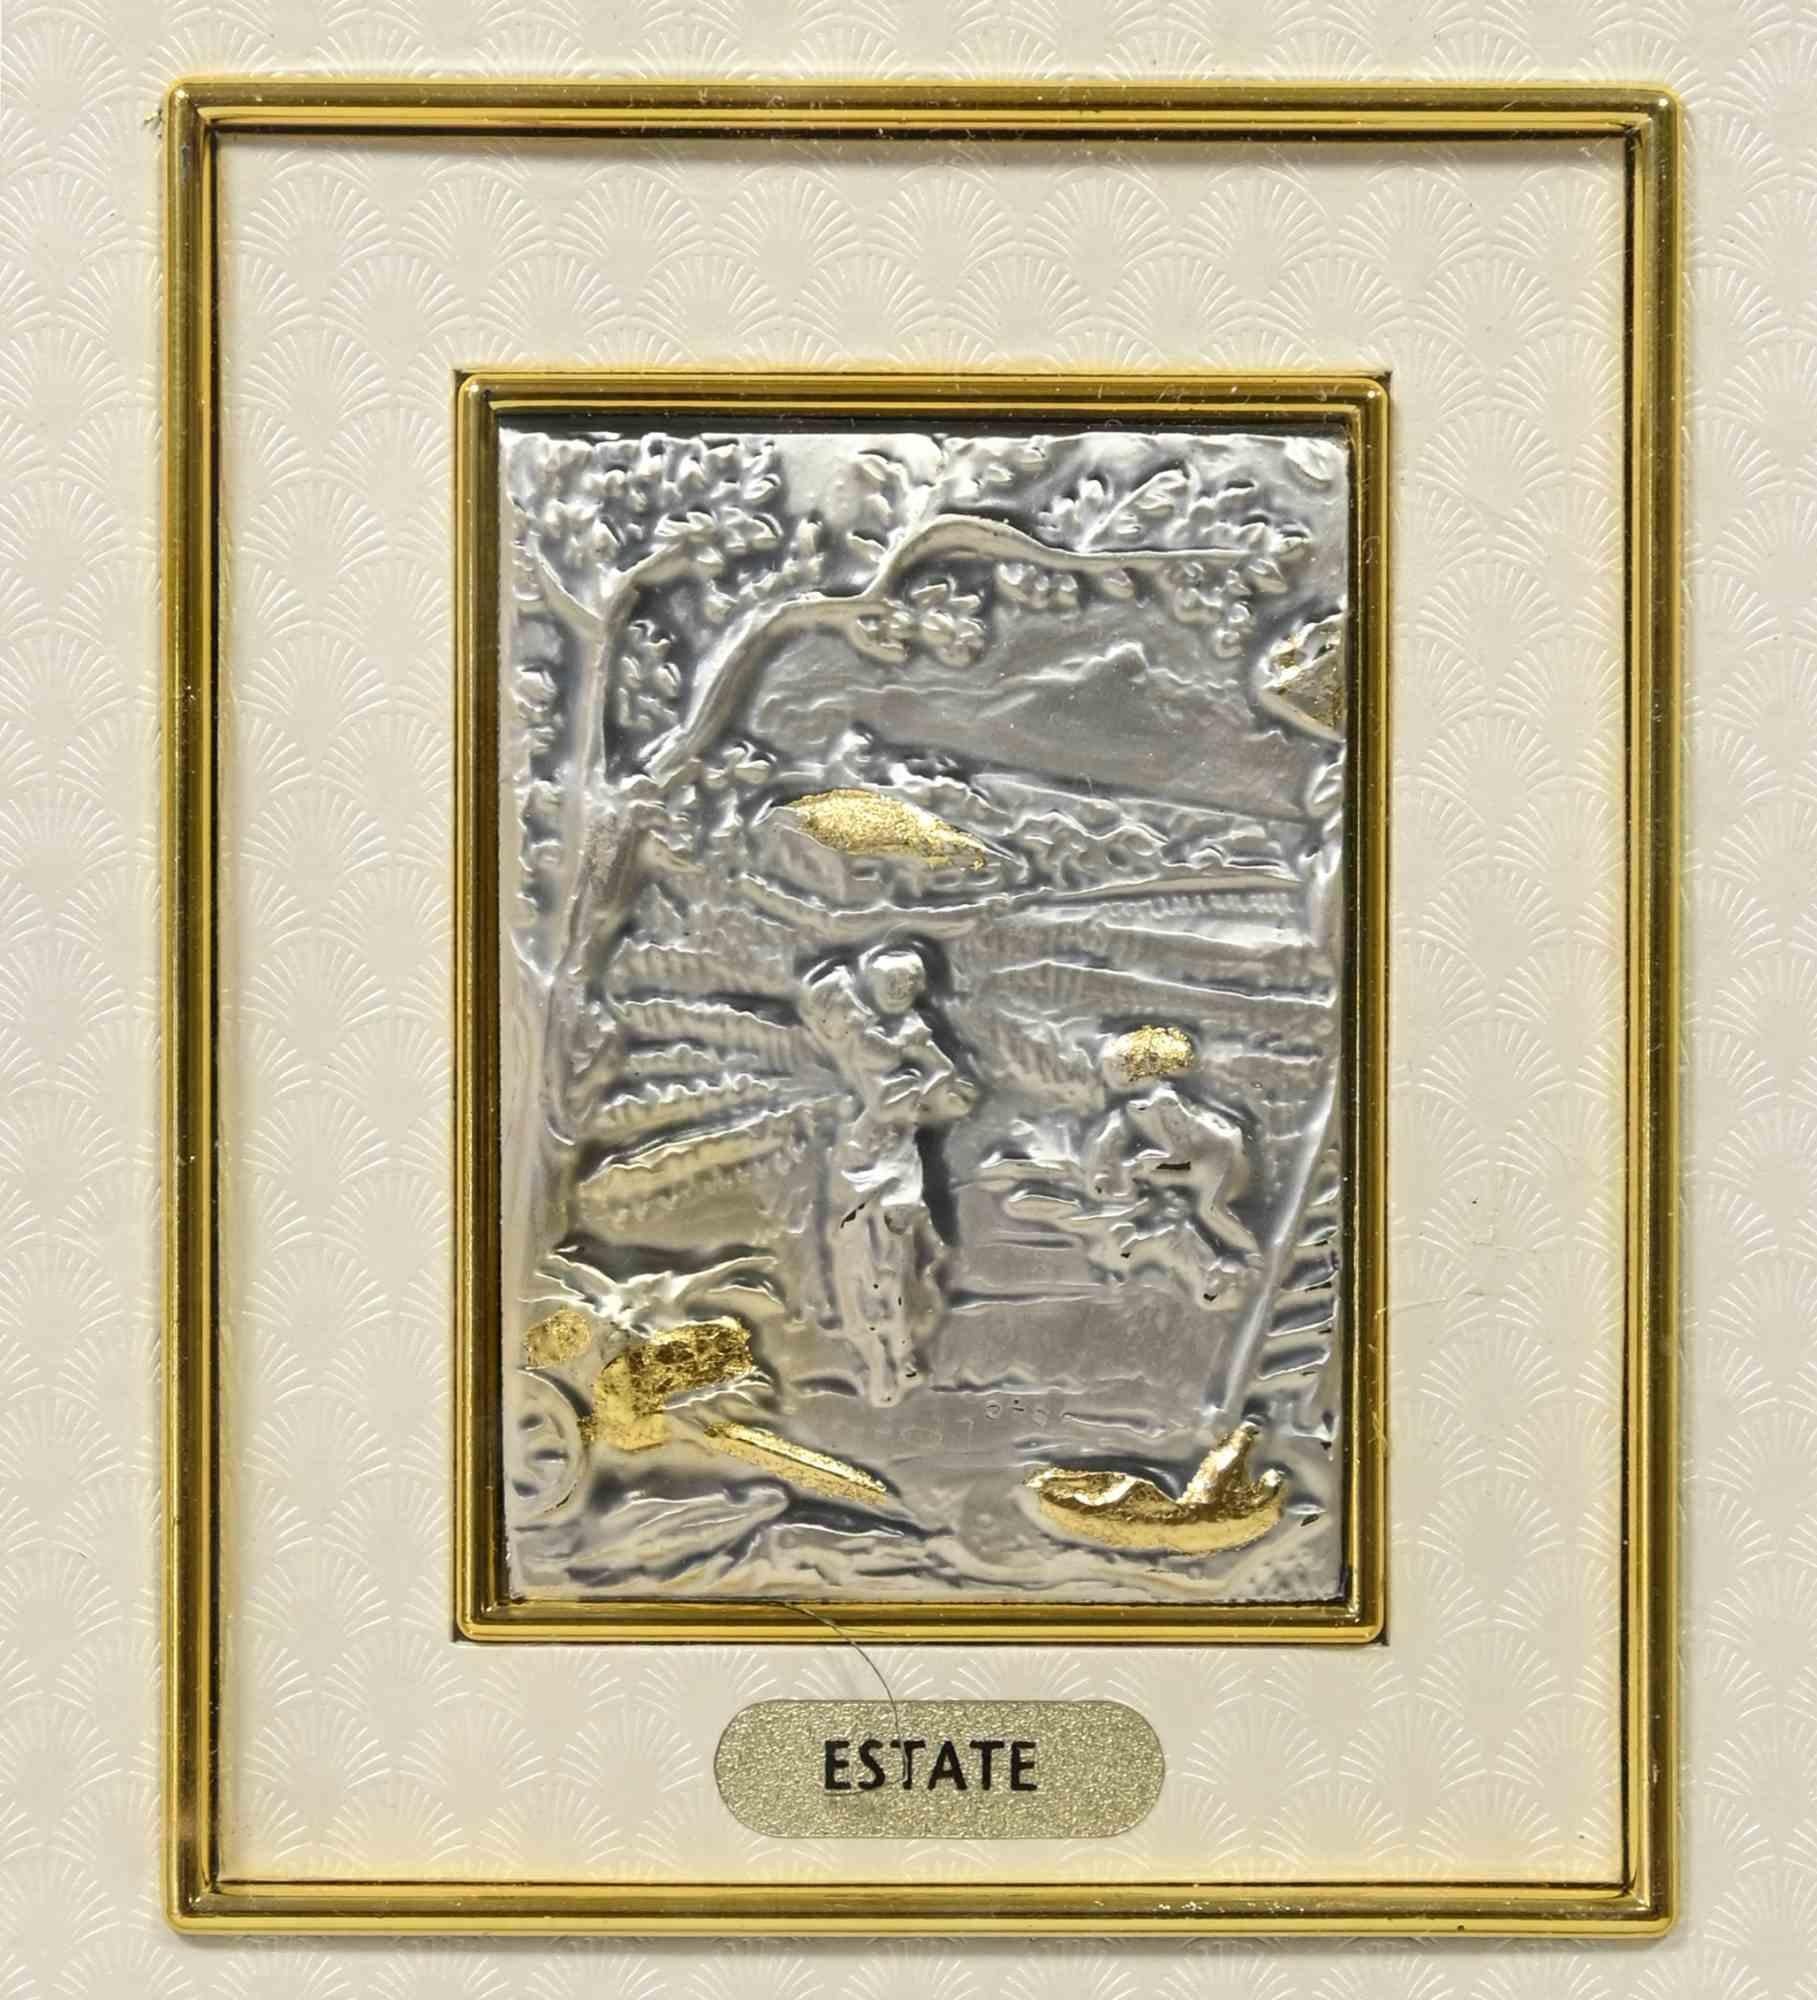 Summer is an original modern artwork realized in the 1970s.

Realized by Euroesse (label on the back)

The artwork is realized on silver plate and gold leaf.

Good conditions except for a stain on the lower margin.

Includes frame.